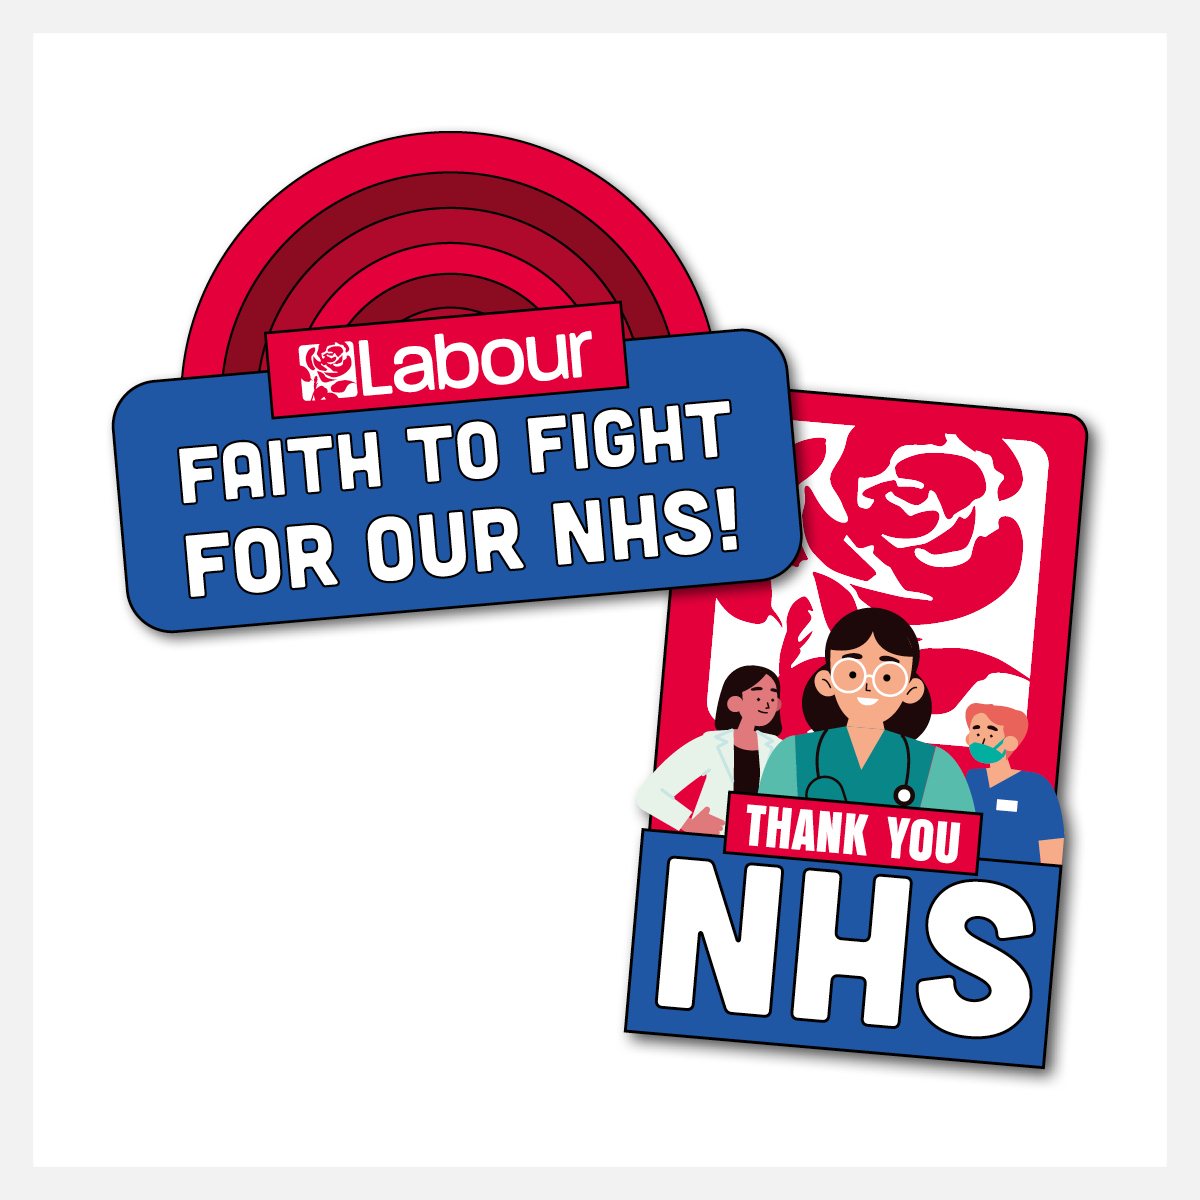 Both pin badges - Thank you NHS and Faith to fight